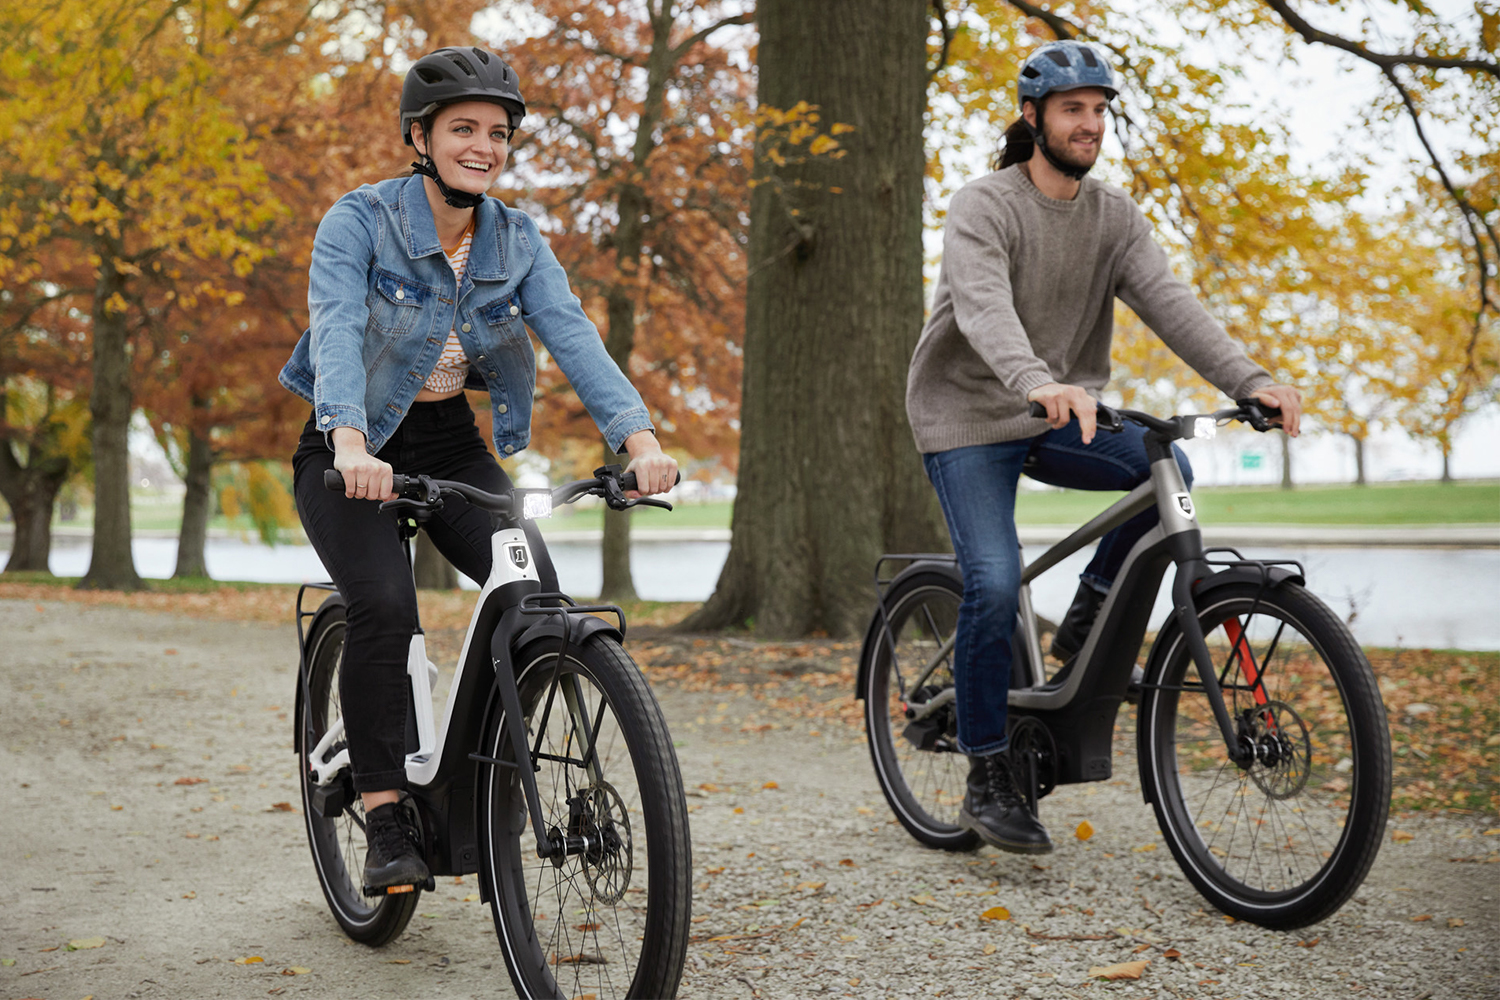 A woman and a man riding two electric bikes from Harley-Davidson's new offshoot company Serial 1 down a street in autumn